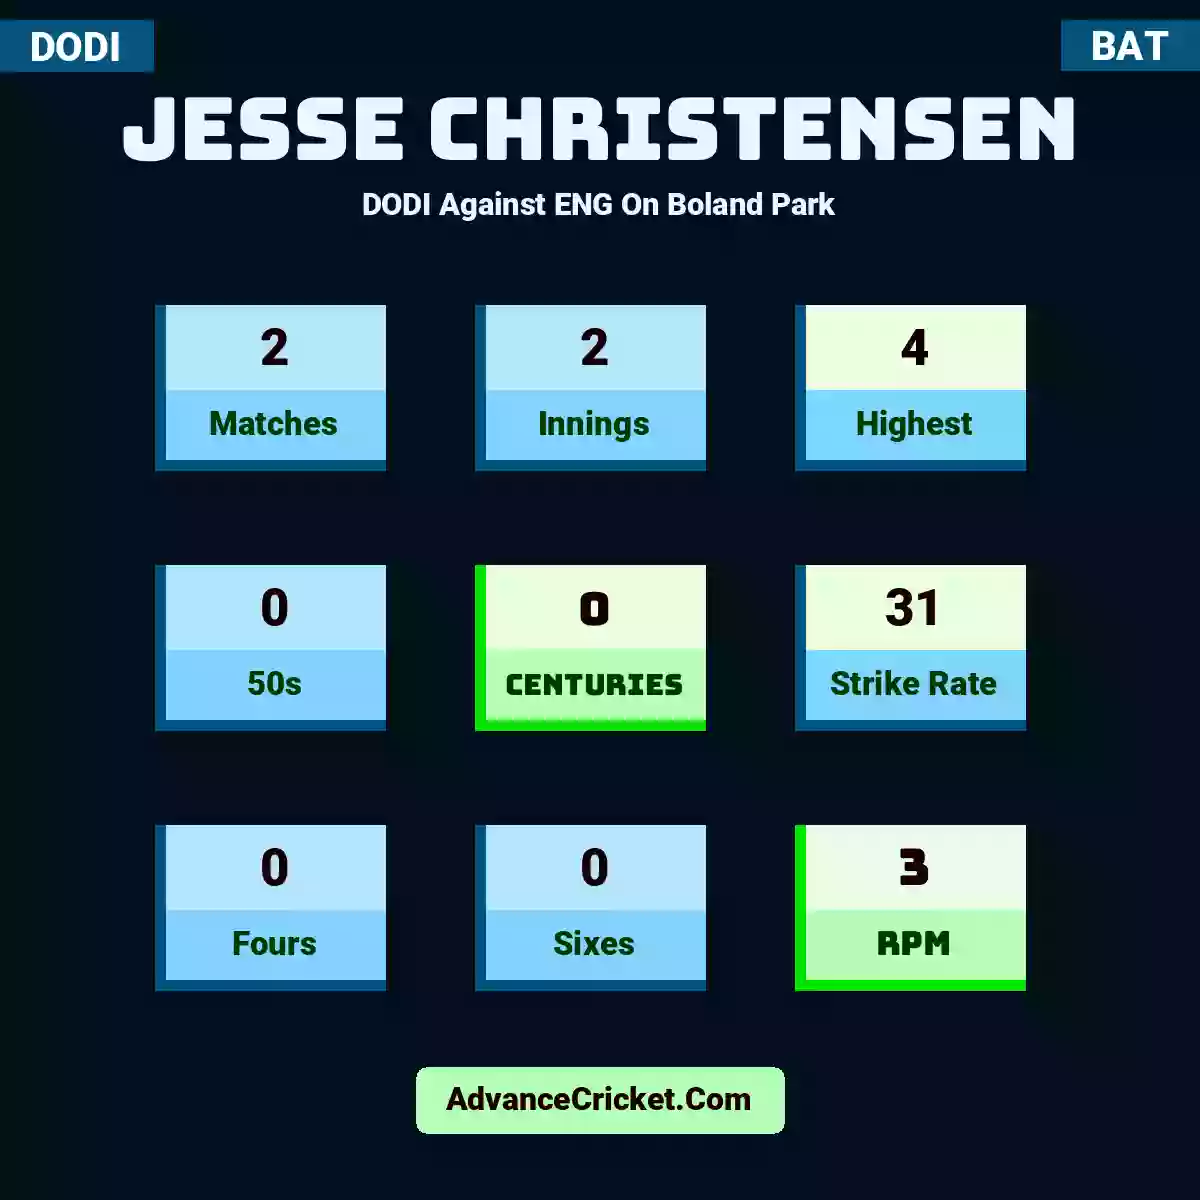 Jesse Christensen DODI  Against ENG On Boland Park, Jesse Christensen played 2 matches, scored 4 runs as highest, 0 half-centuries, and 0 centuries, with a strike rate of 31. J.Christensen hit 0 fours and 0 sixes, with an RPM of 3.